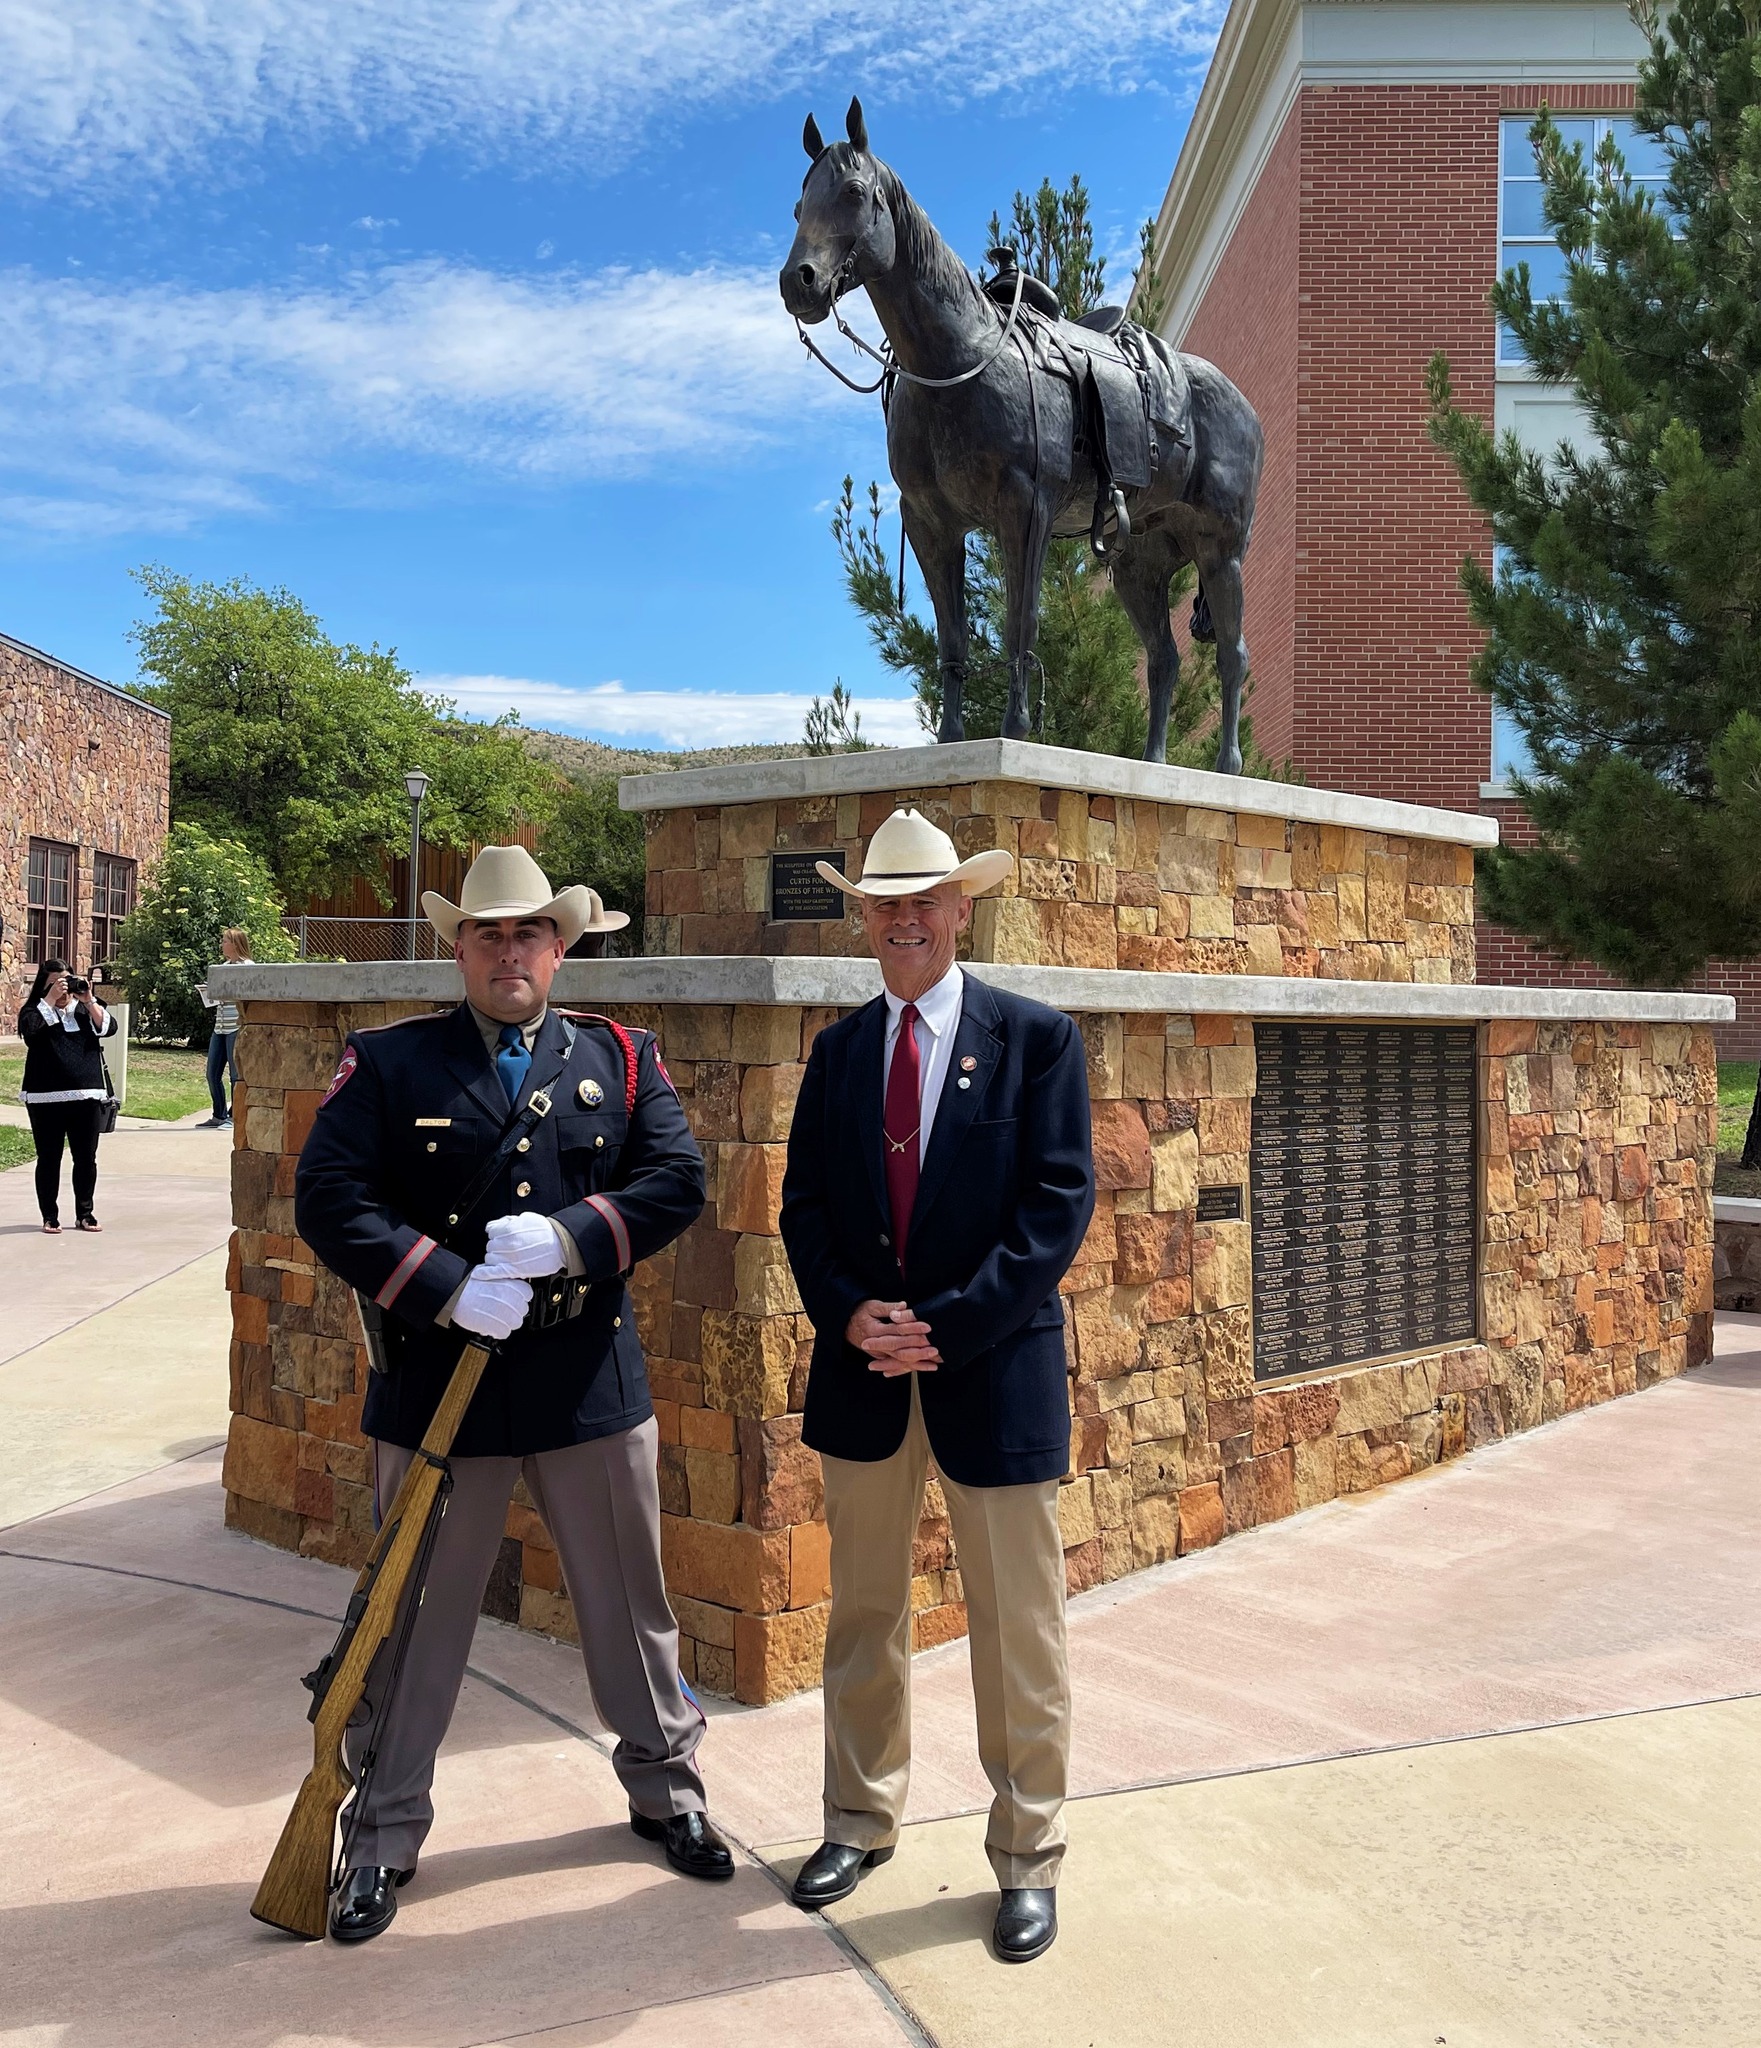 Texas State Trooper Ryan Dalton and Ben H. English stand in front of the Donde Esta? monument on the Sul Ross State University campus in Alpine, TX following the Big Bend Area Law Enforcement Officers Association annual memorial service.